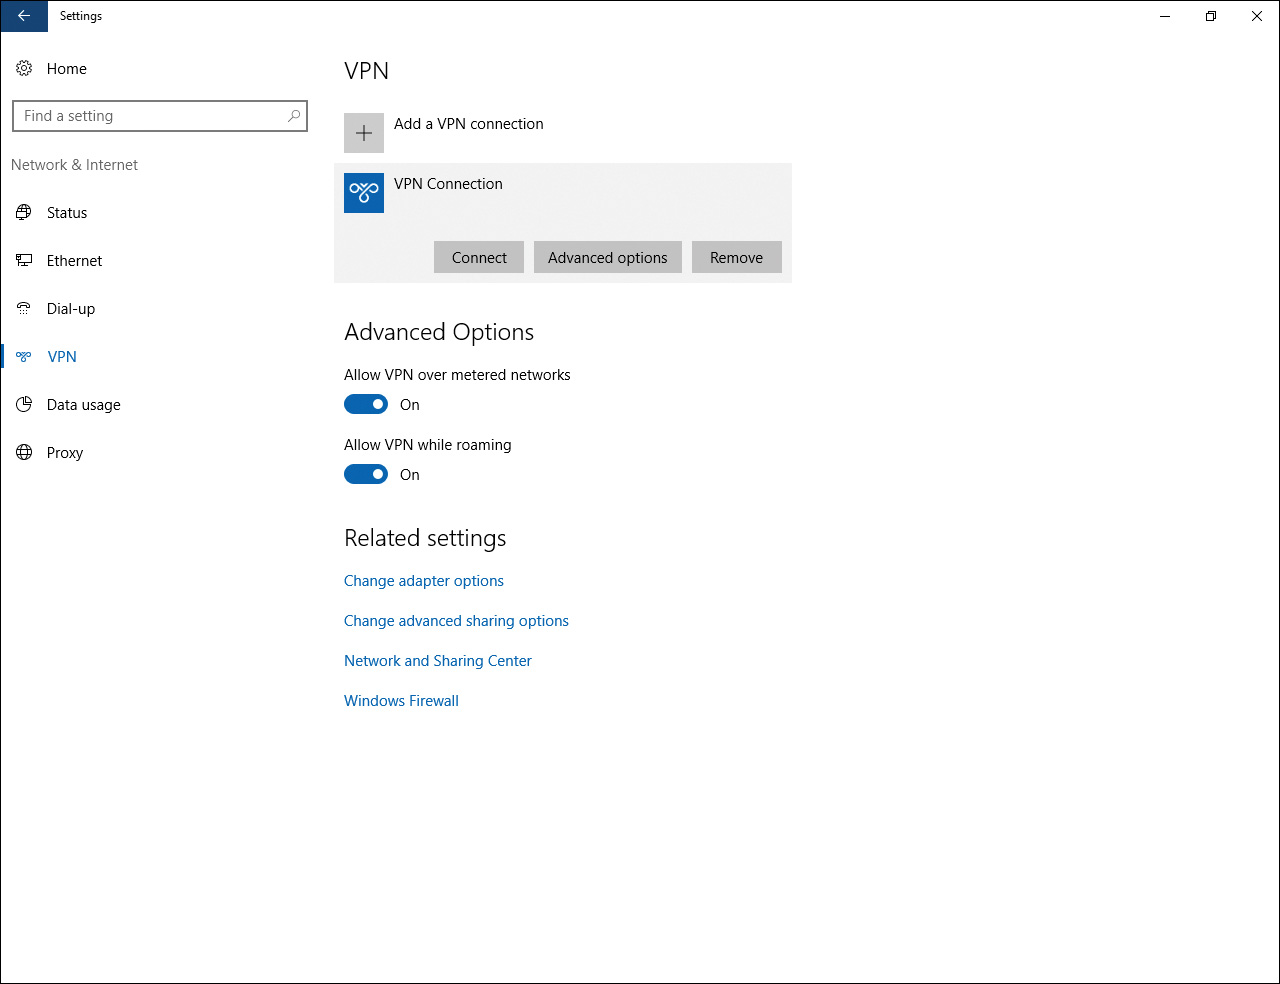 Screenshot shows Settings window. In the left pane, VPN is selected under Network and Internet. The right pane represents VPN. Under Advanced Options, for Allow VPN over metered networks and for Allow VPN while roaming, On is set in the option buttons.